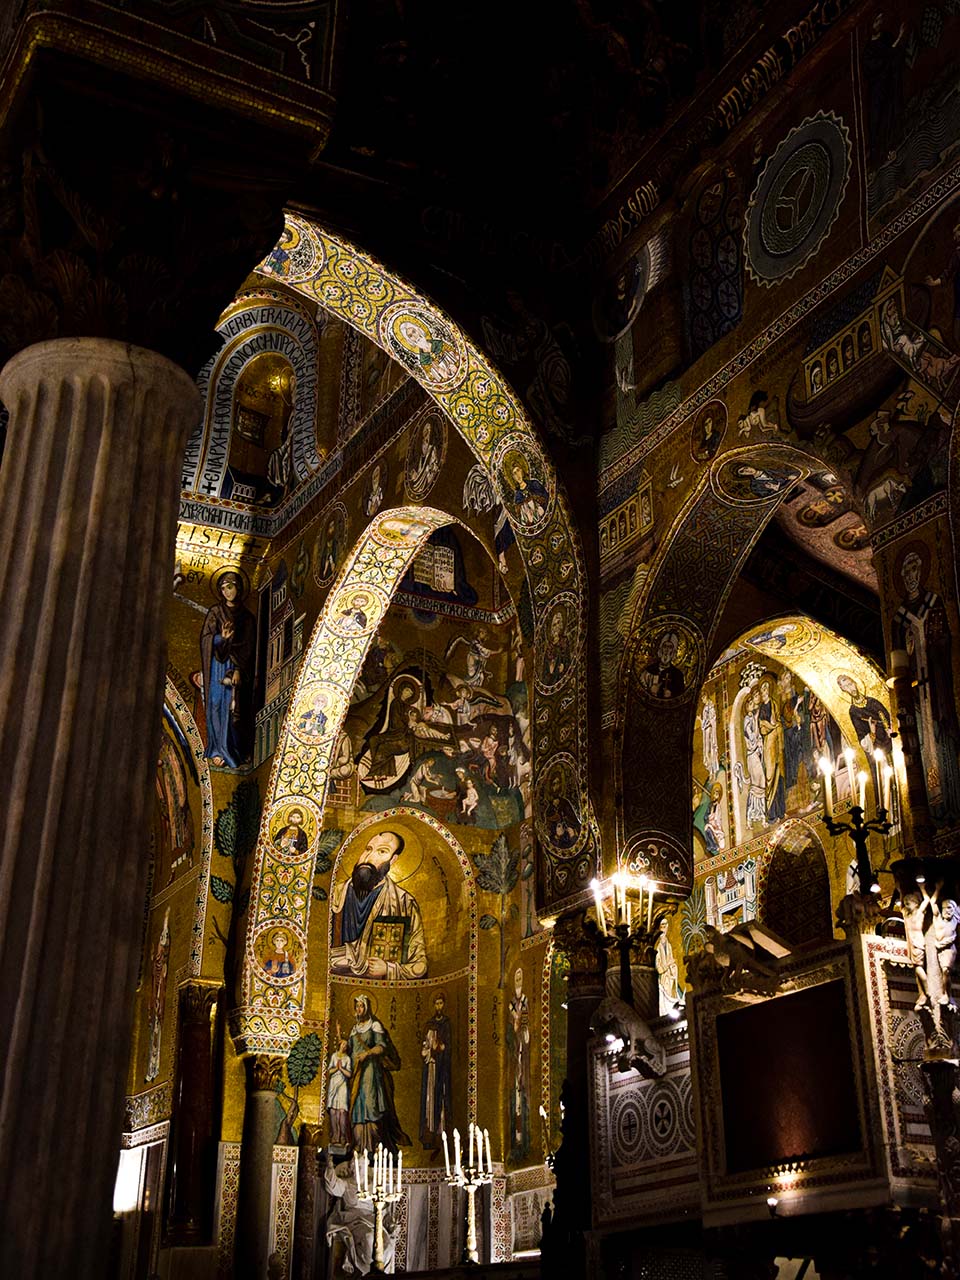 interiors with Byzantine mosaics of the Monreale Cathedral